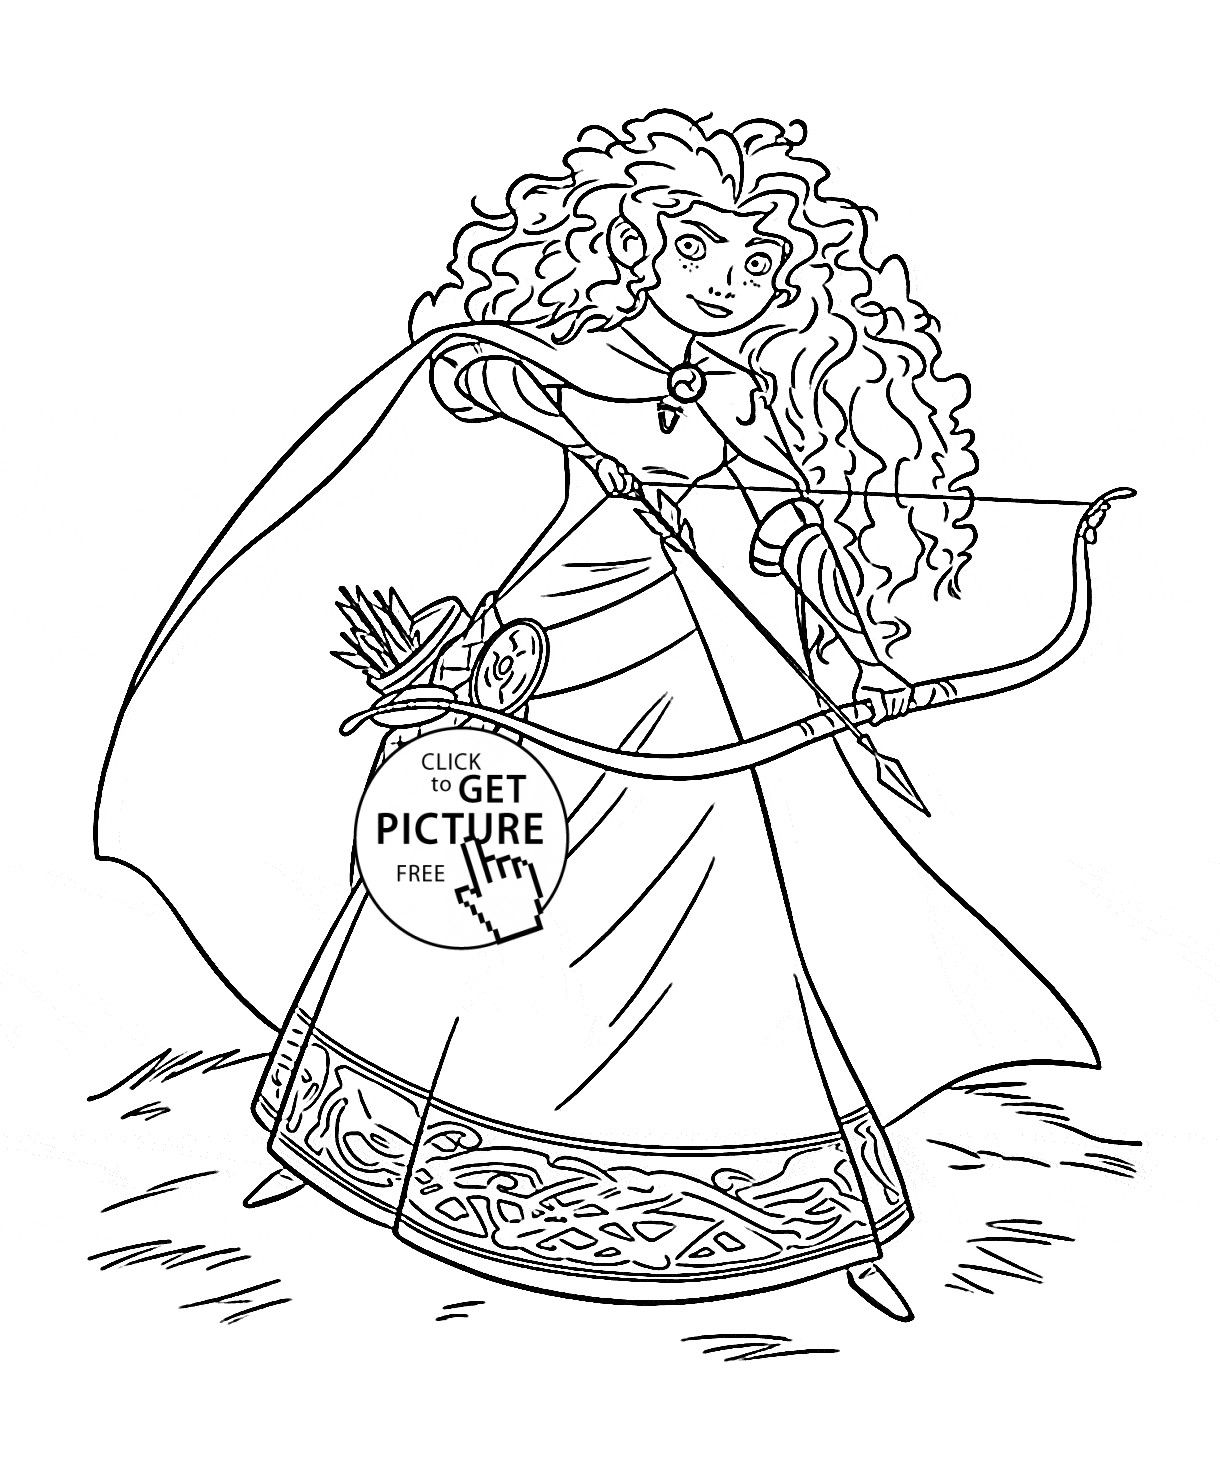 Coloring: Disney Princess Coloring Pages Brave Merida The ...